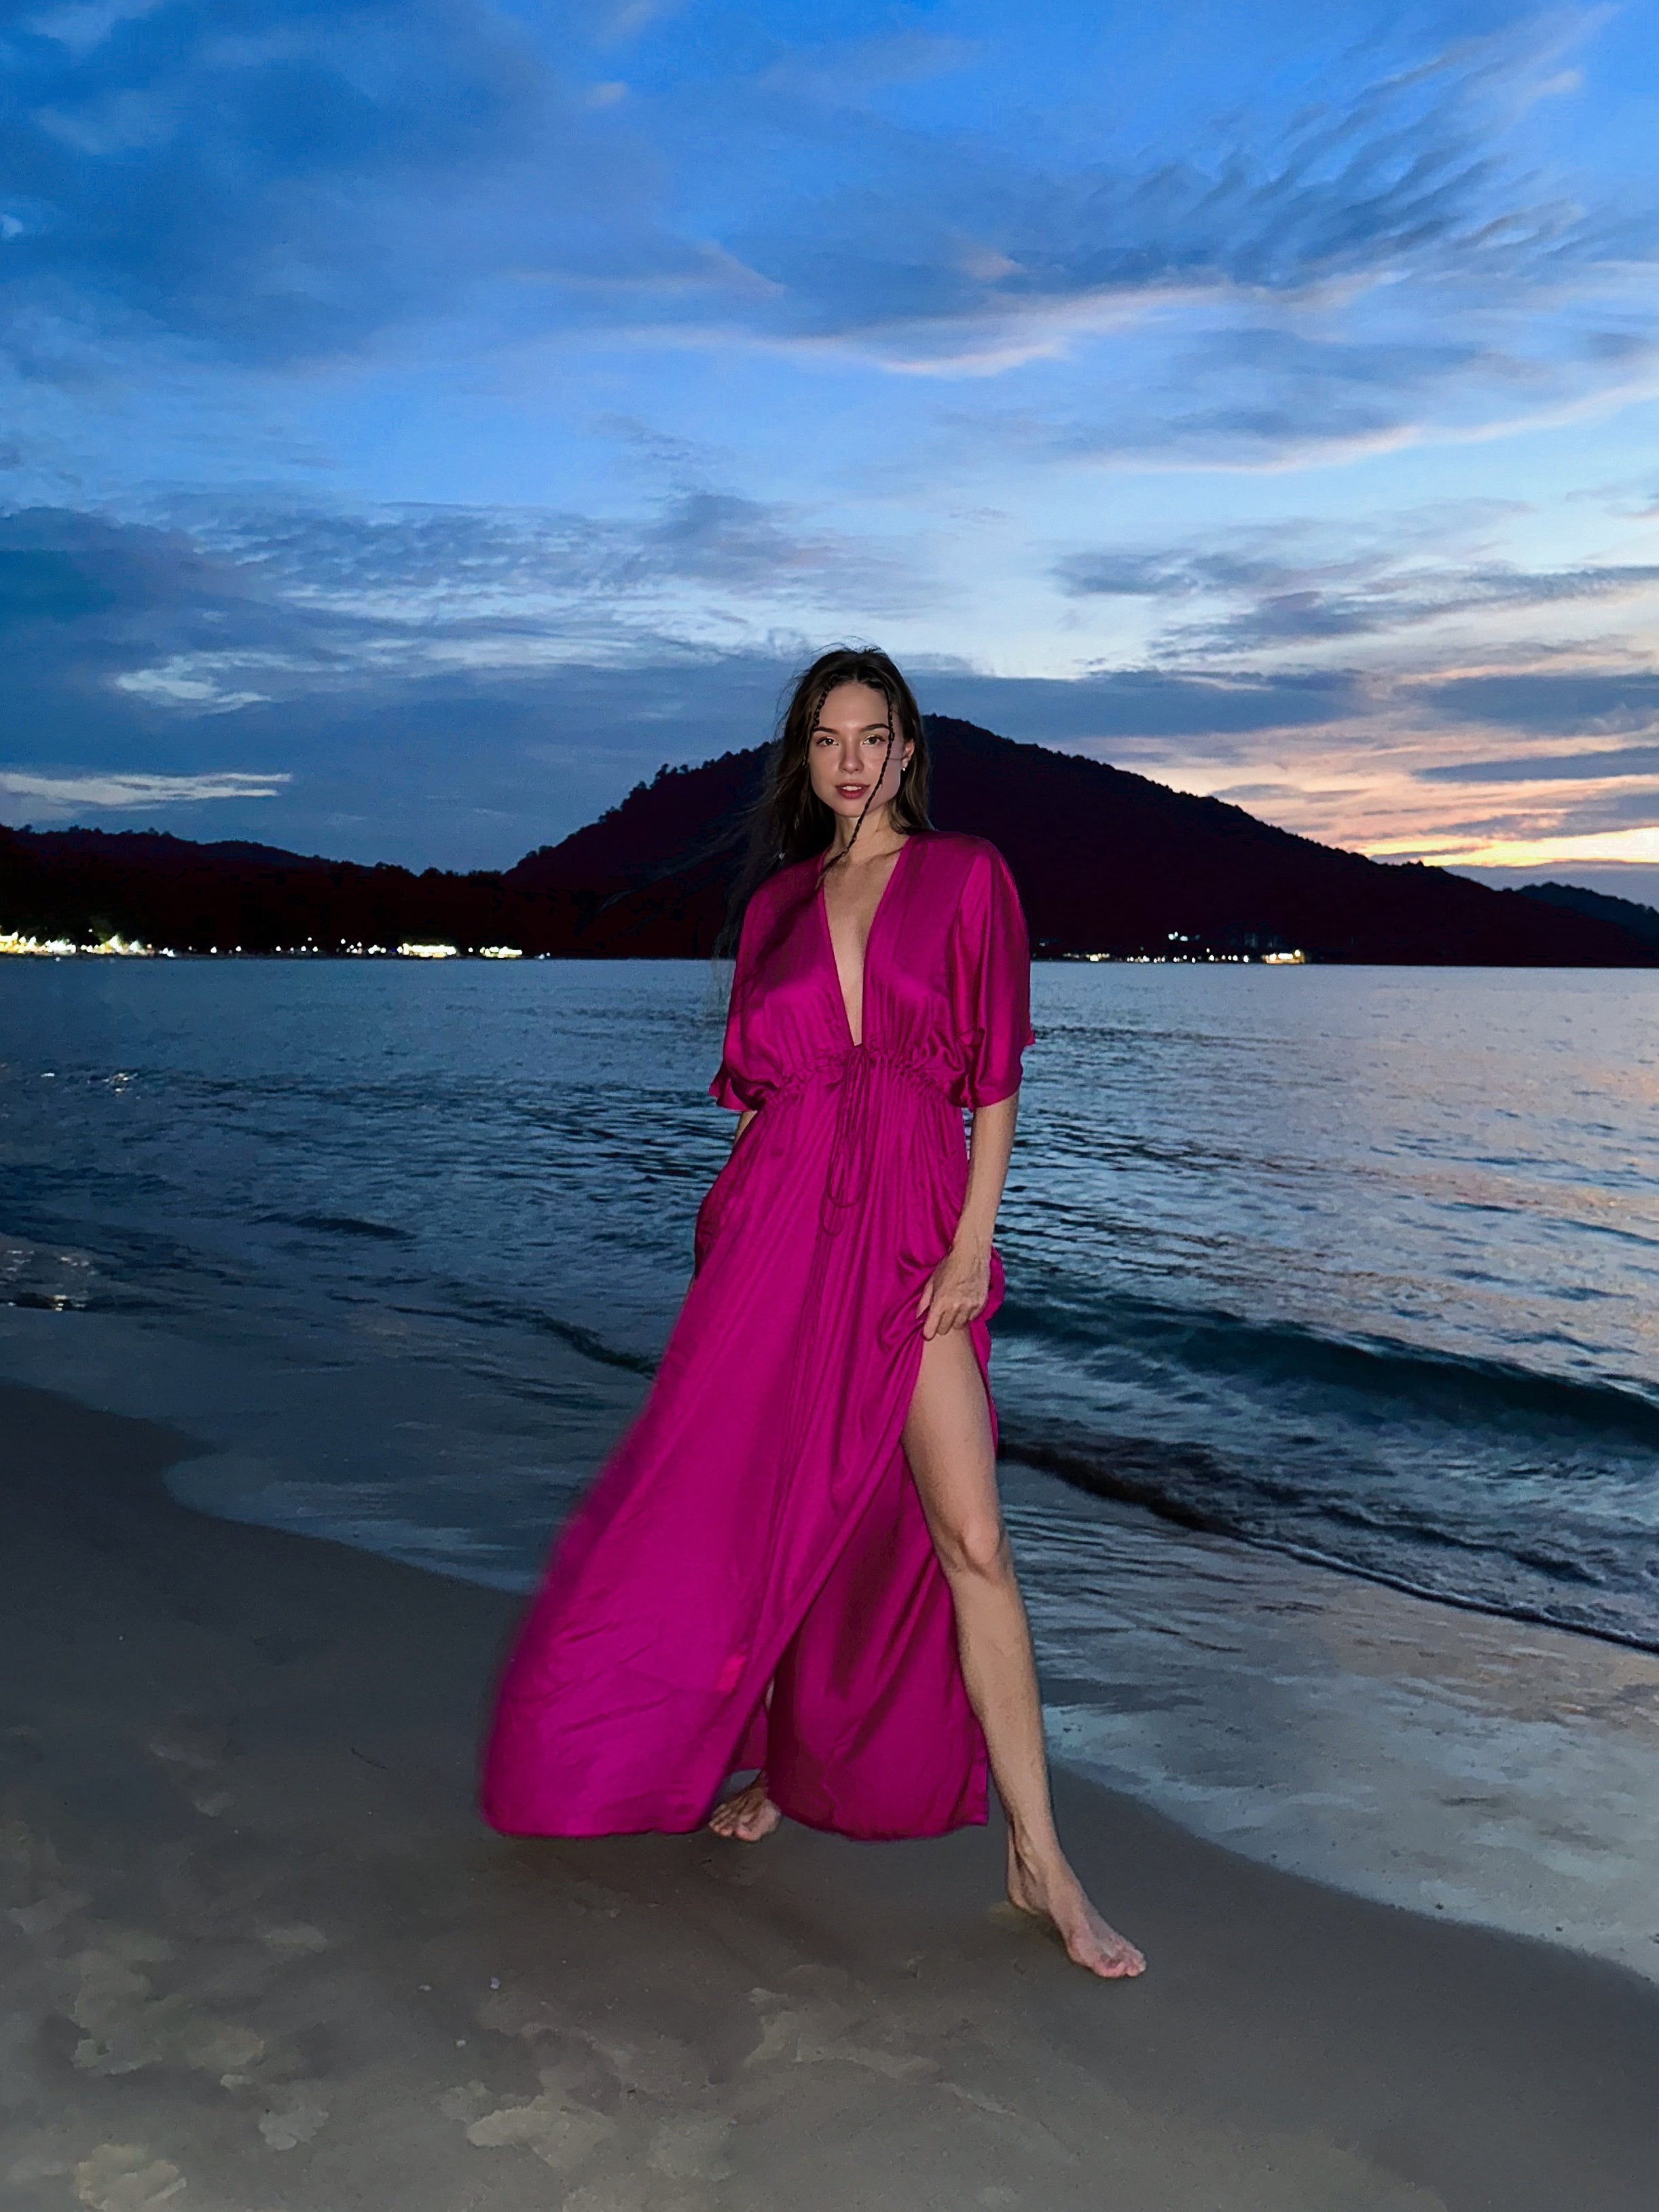 Shop Pink Kaftan Dress in limitless comfort and elegance with our Goddess Kaftan Maxi Dress Dyed fuchsia kaftan maxi dress. This fuchsia caftan maxi dress is the perfect vacation wear with Coco de Chom?